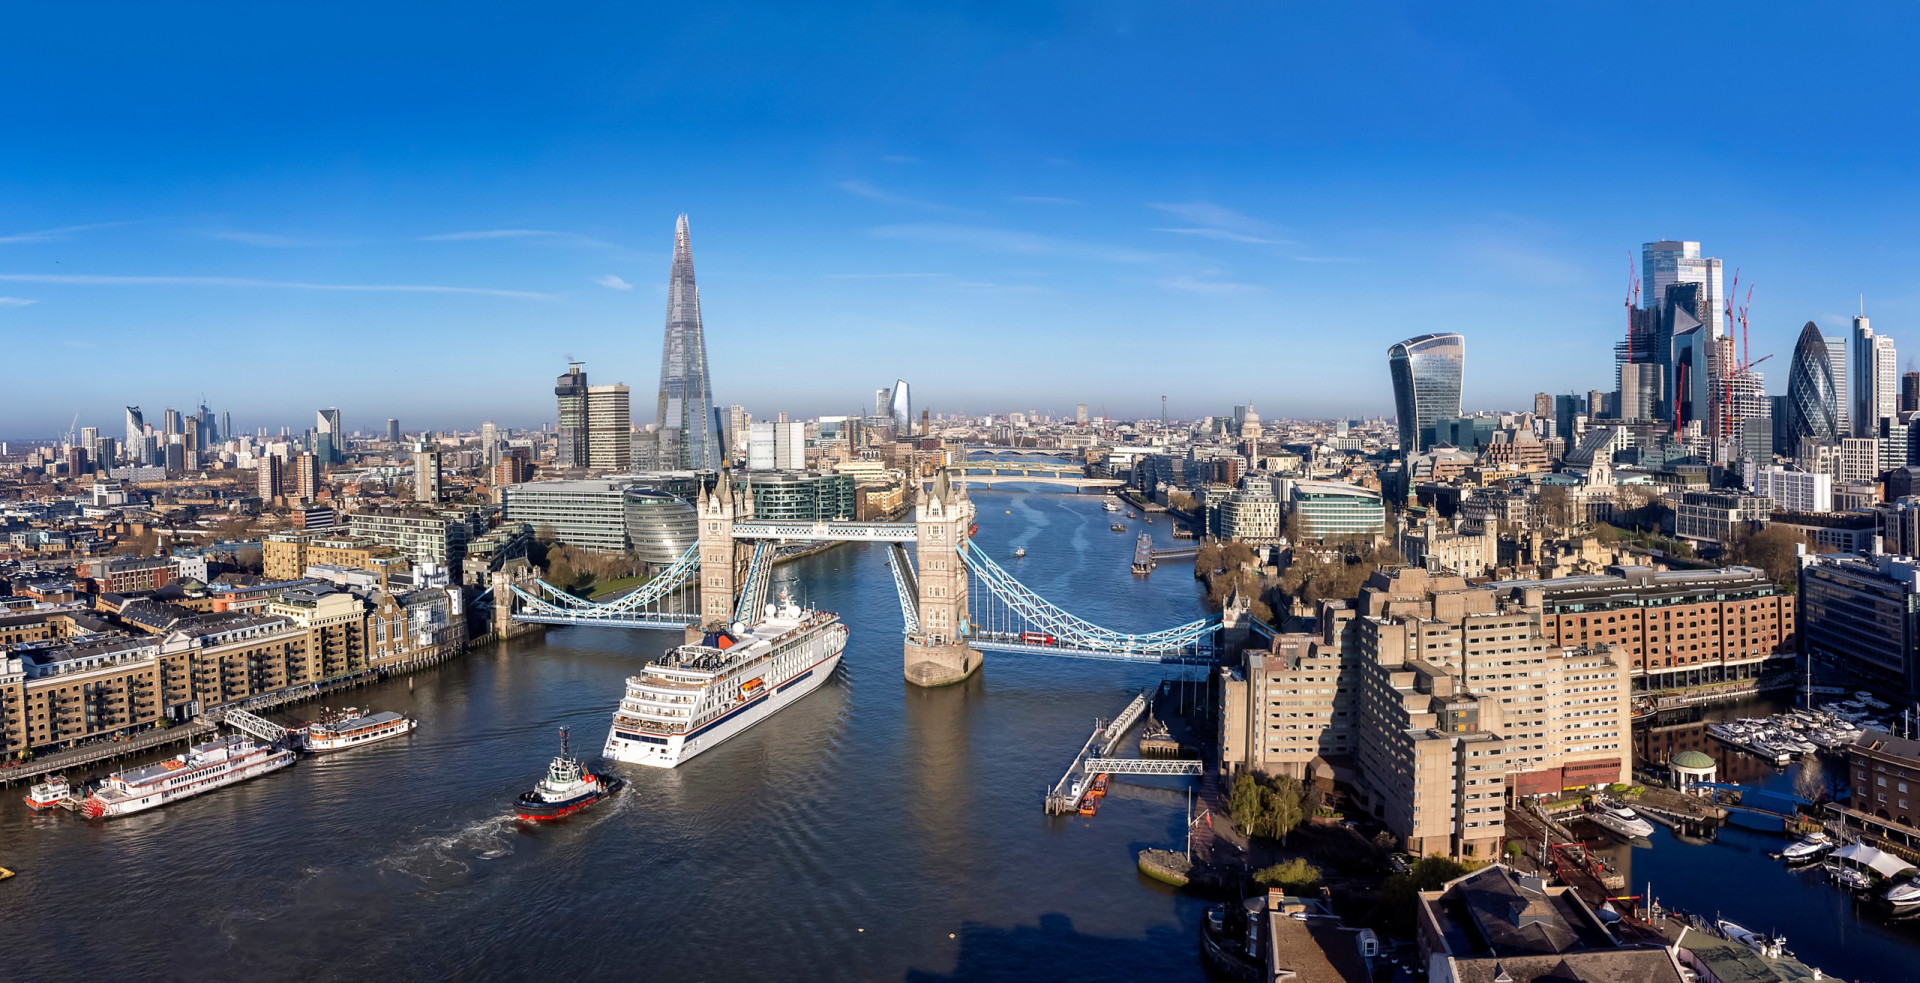 <p>With a rent index of 69.5, London is a global city of immense prestige. It combines rich history with modern flair, making it one of the world's most sought-after yet expensive places to live.</p><p><a href="https://www.msn.com/en-in/community/channel/vid-7xx8mnucu55yw63we9va2gwr7uihbxwc68fxqp25x6tg4ftibpra?cvid=94631541bc0f4f89bfd59158d696ad7e">Follow us and access great exclusive content every day</a></p>